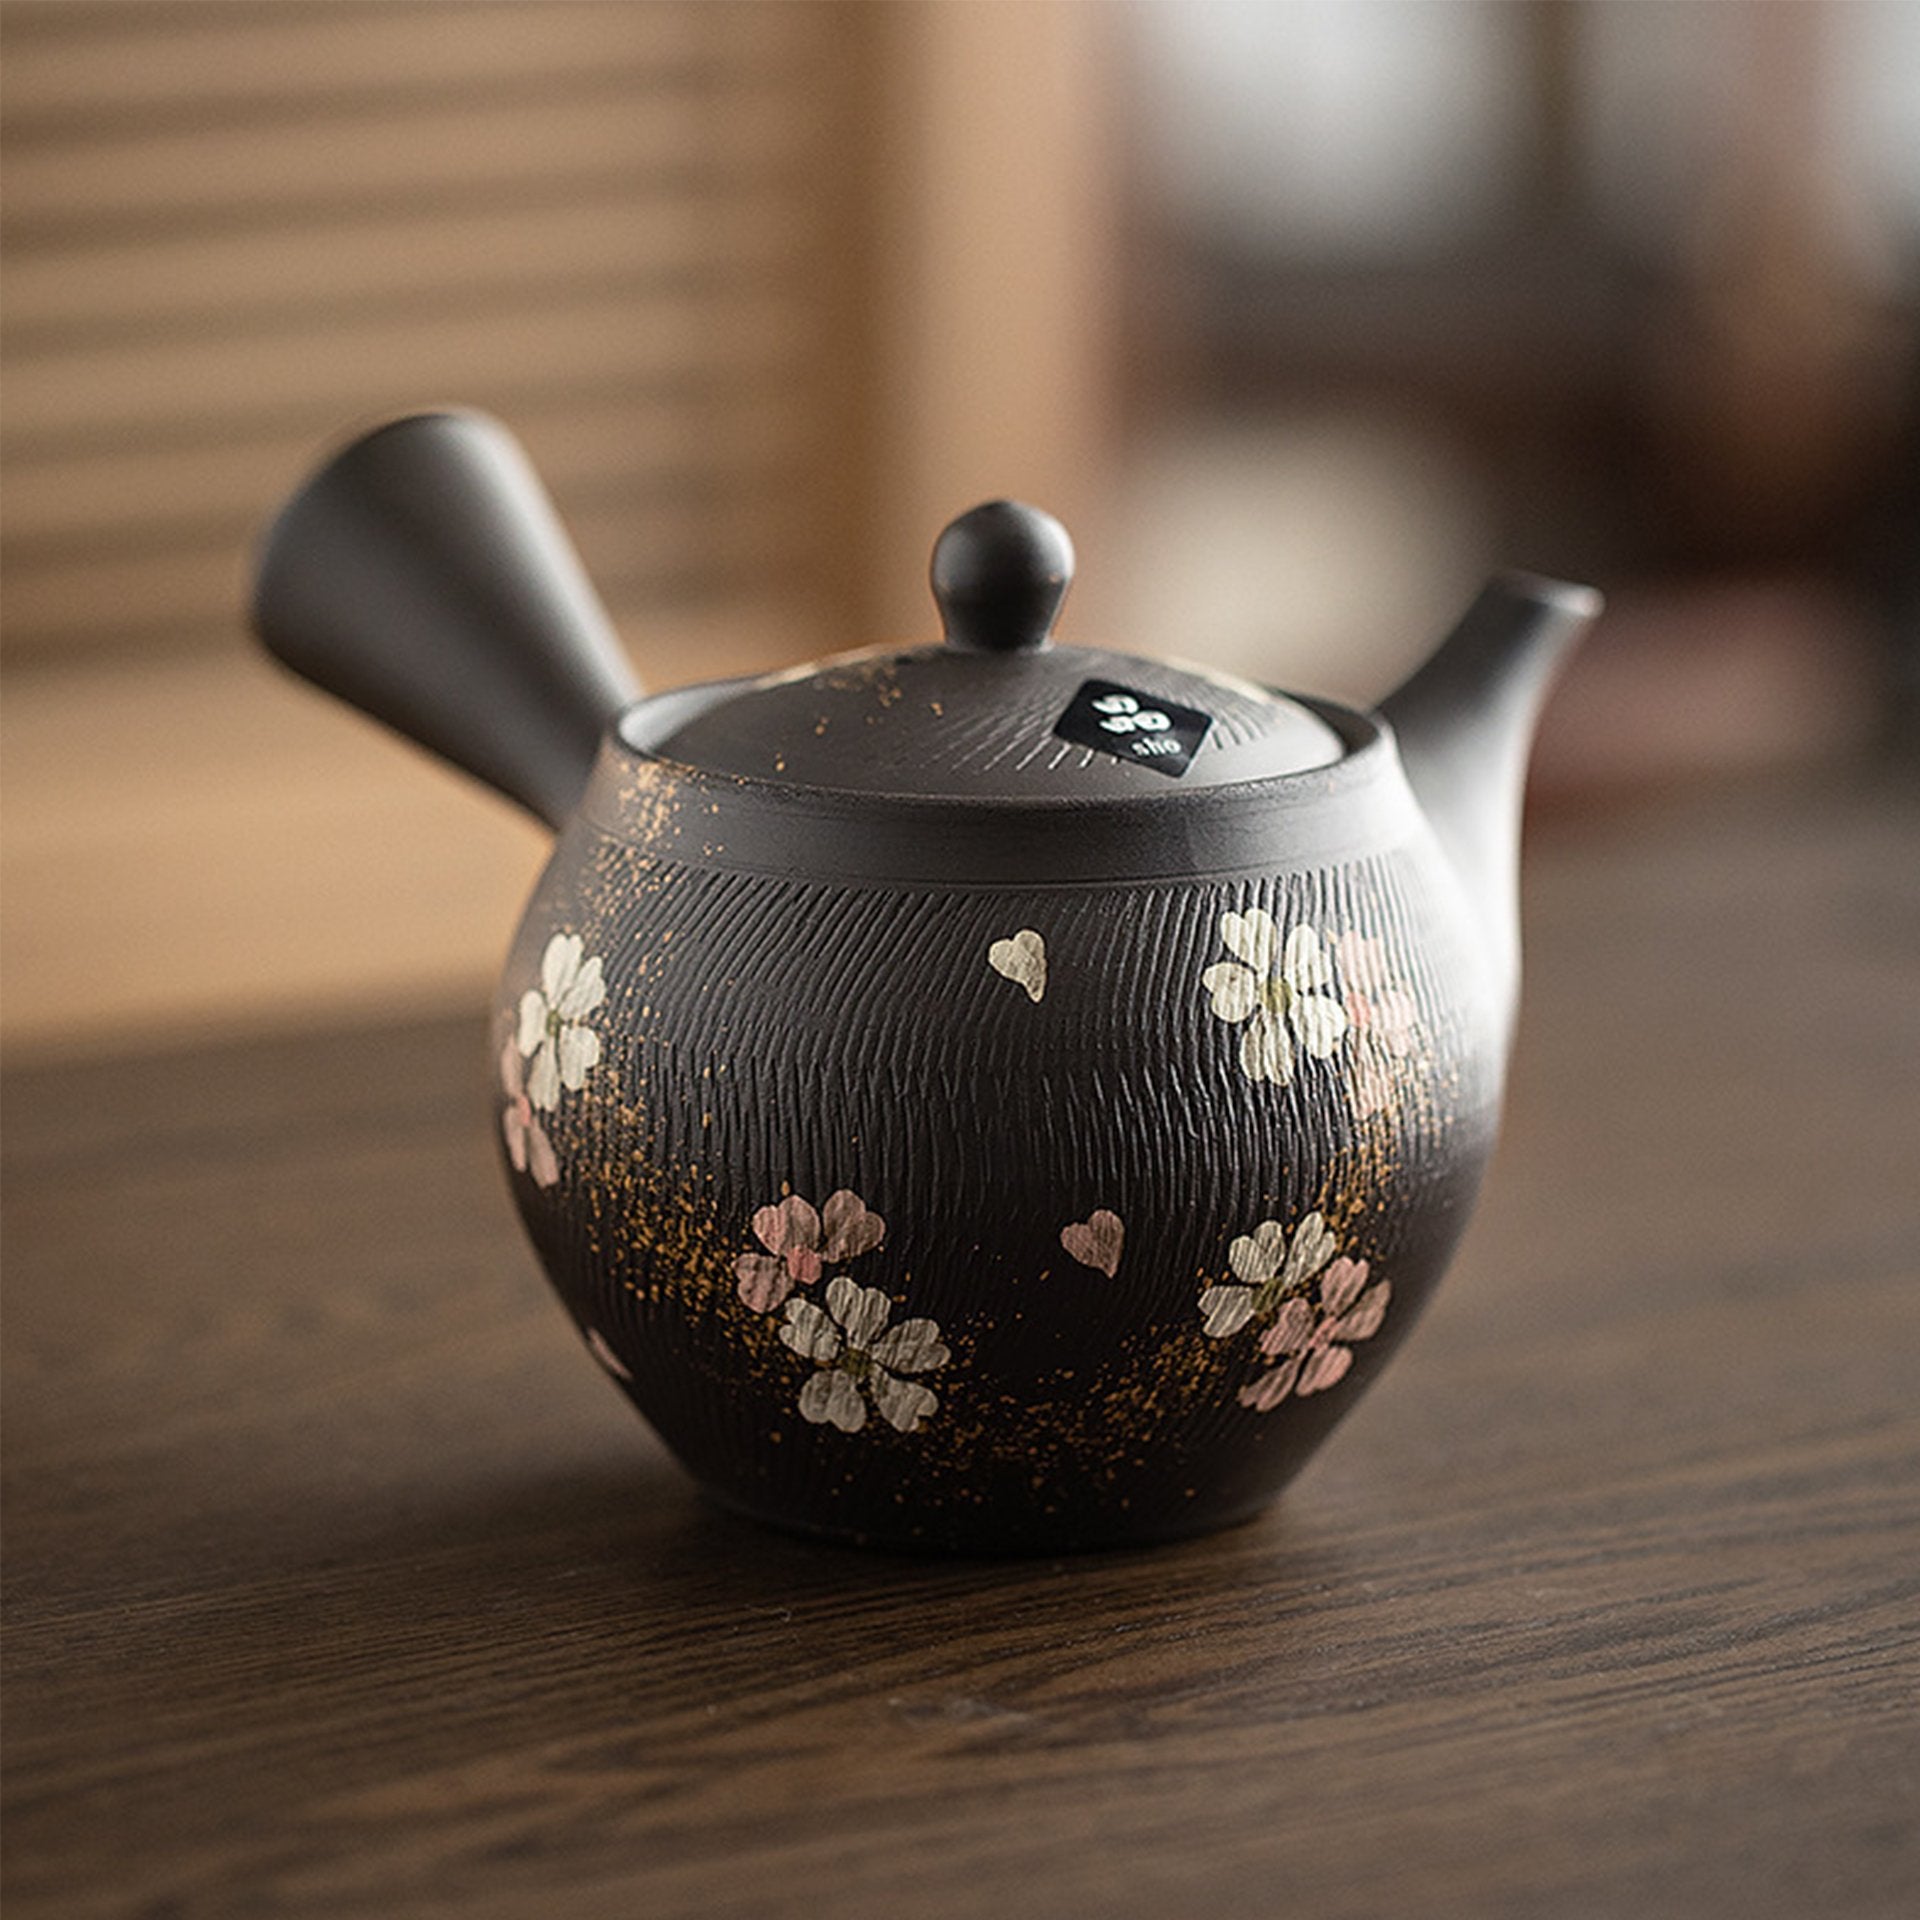 Traditional Japanese teapot with floral motifs displayed on a wooden table.